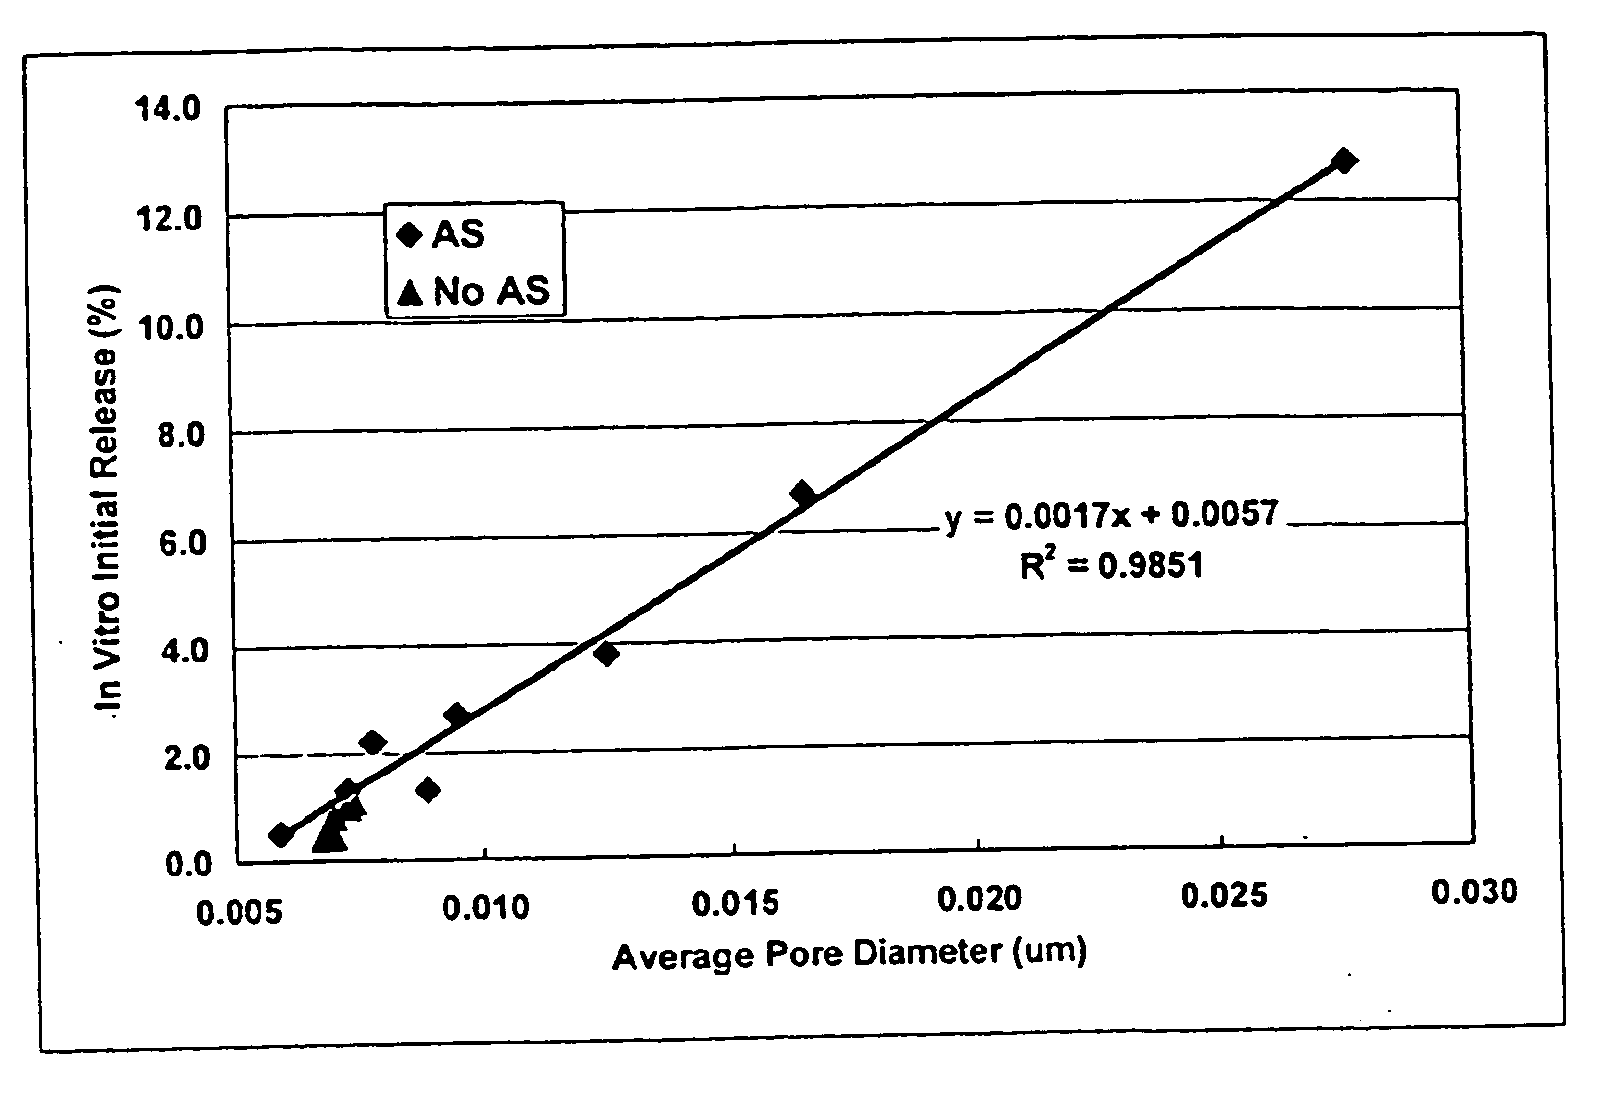 Polymer-based sustained release device